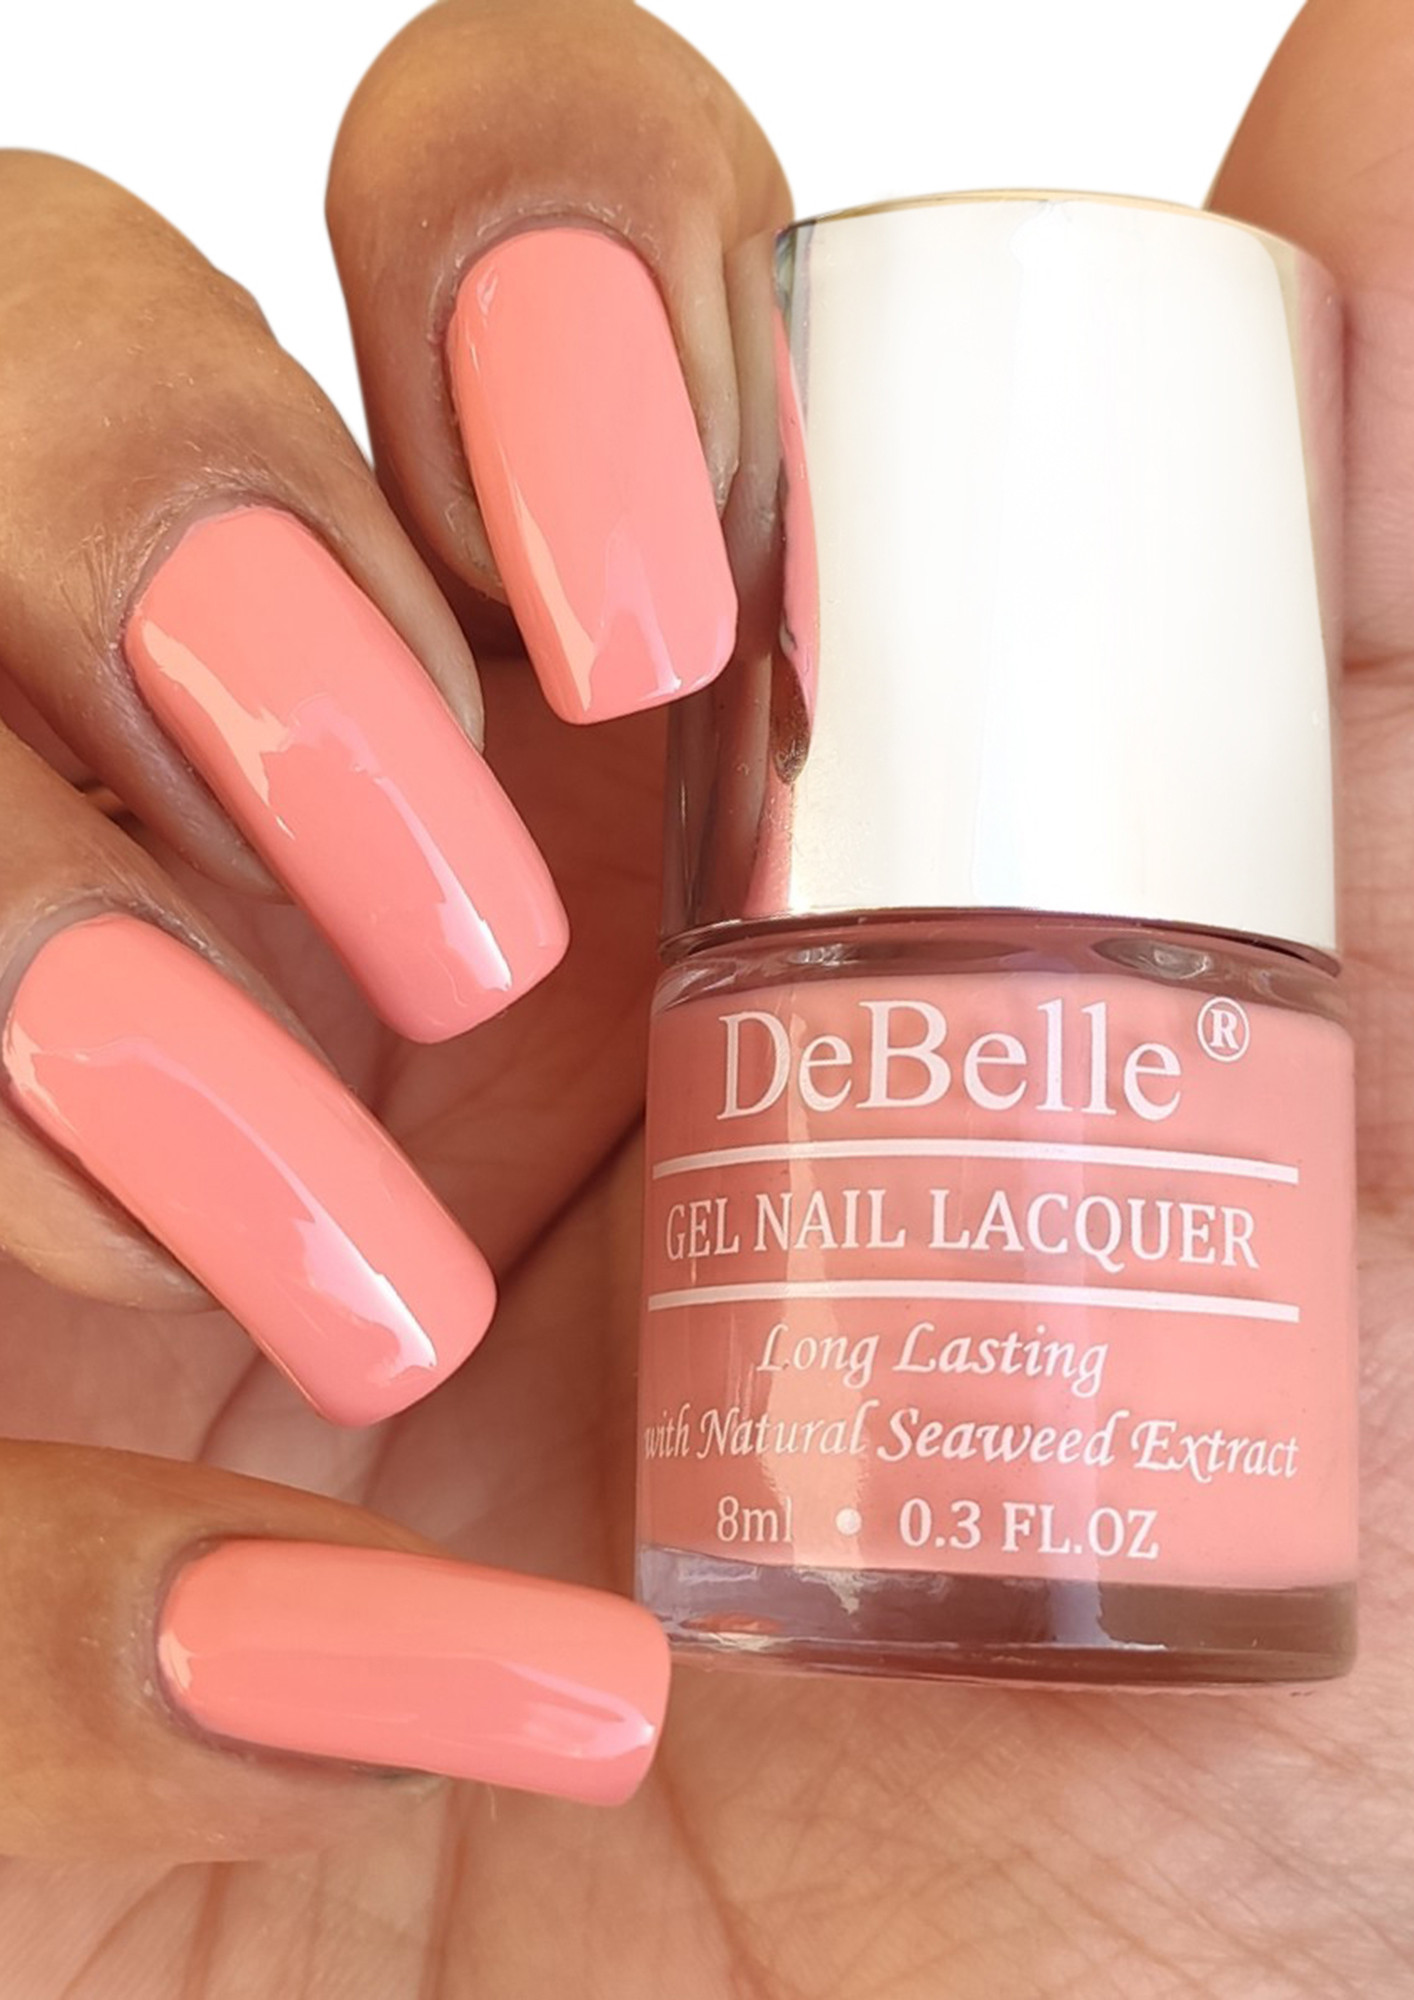 Perfect Summer Nail Colours According To Your Skin Tone – DeBelle Cosmetix  Online Store